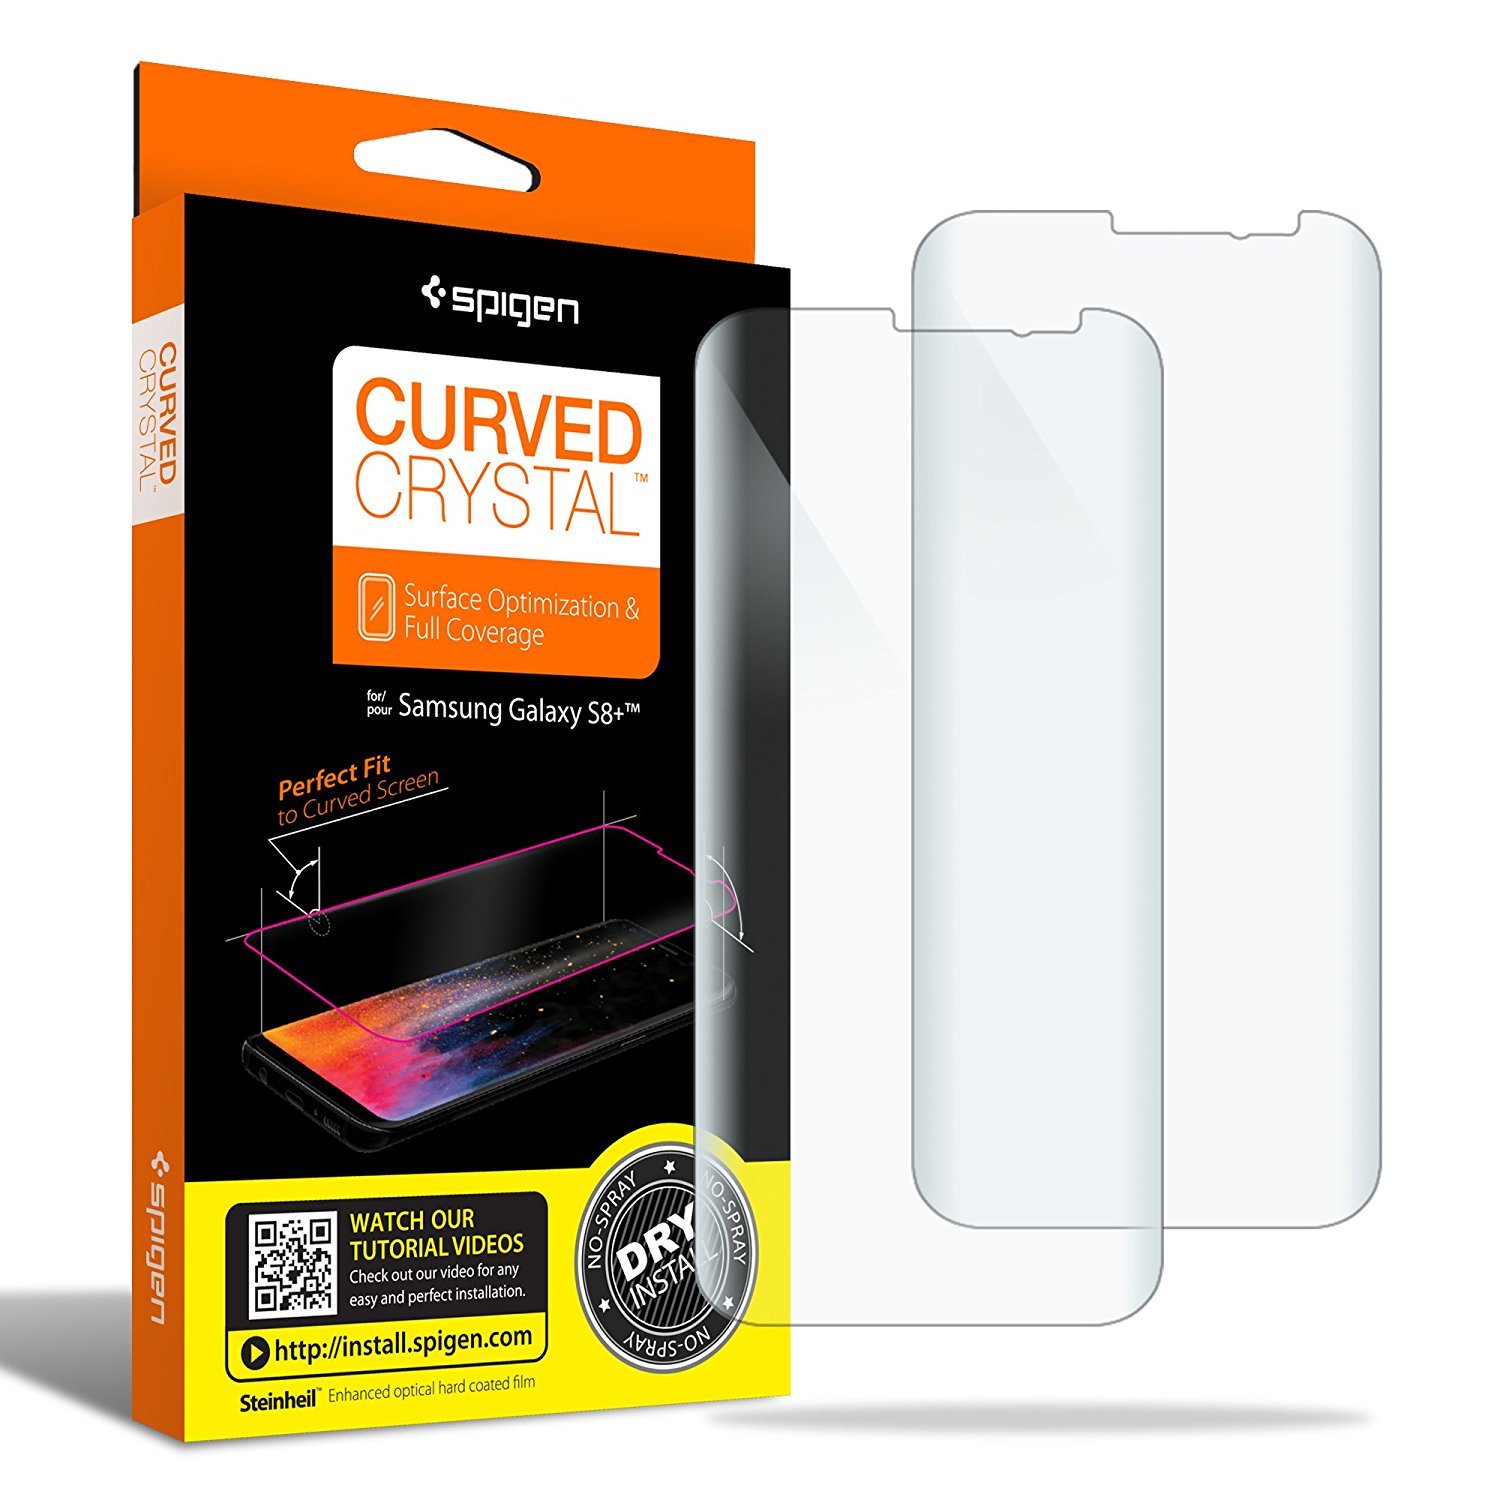 Galaxy S8 Plus Screen Protector, Genuine SPIGEN HD Curved Crystal Film for Samsung